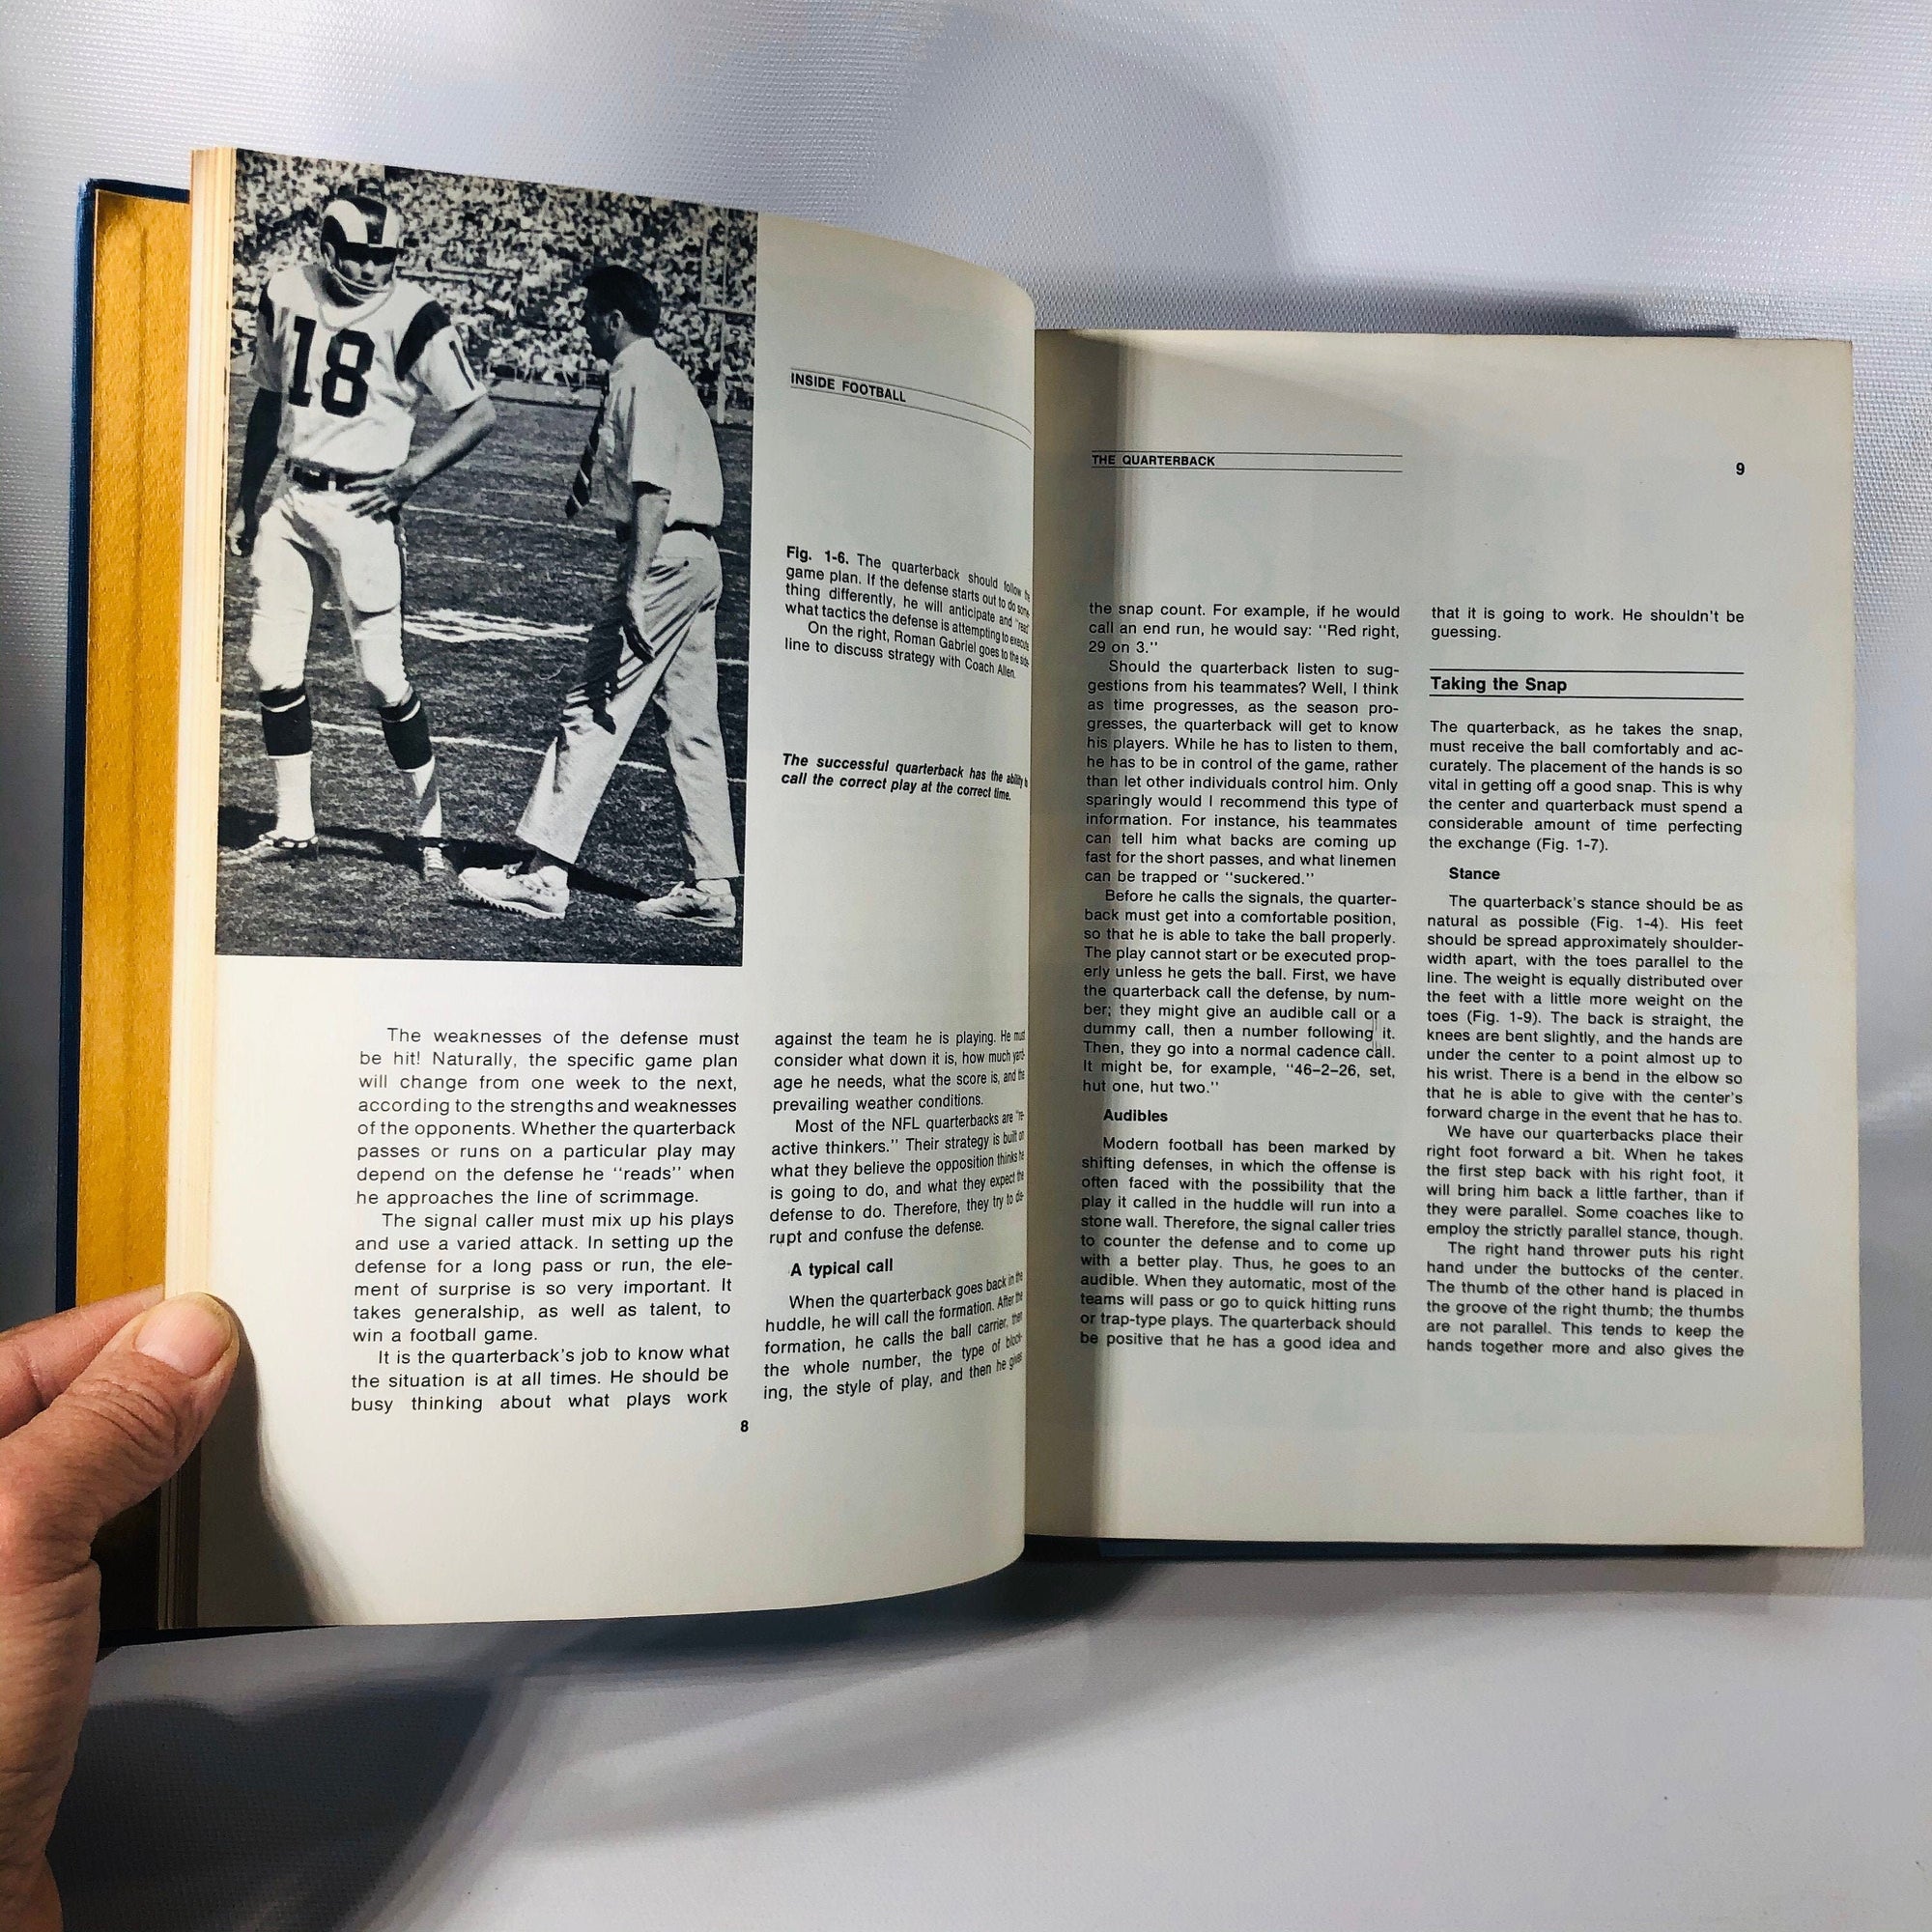 Inside Football Fundamentals Strategy and Tactics for Winning by George Allen with Don Weiskopf 1970 Vintage Book